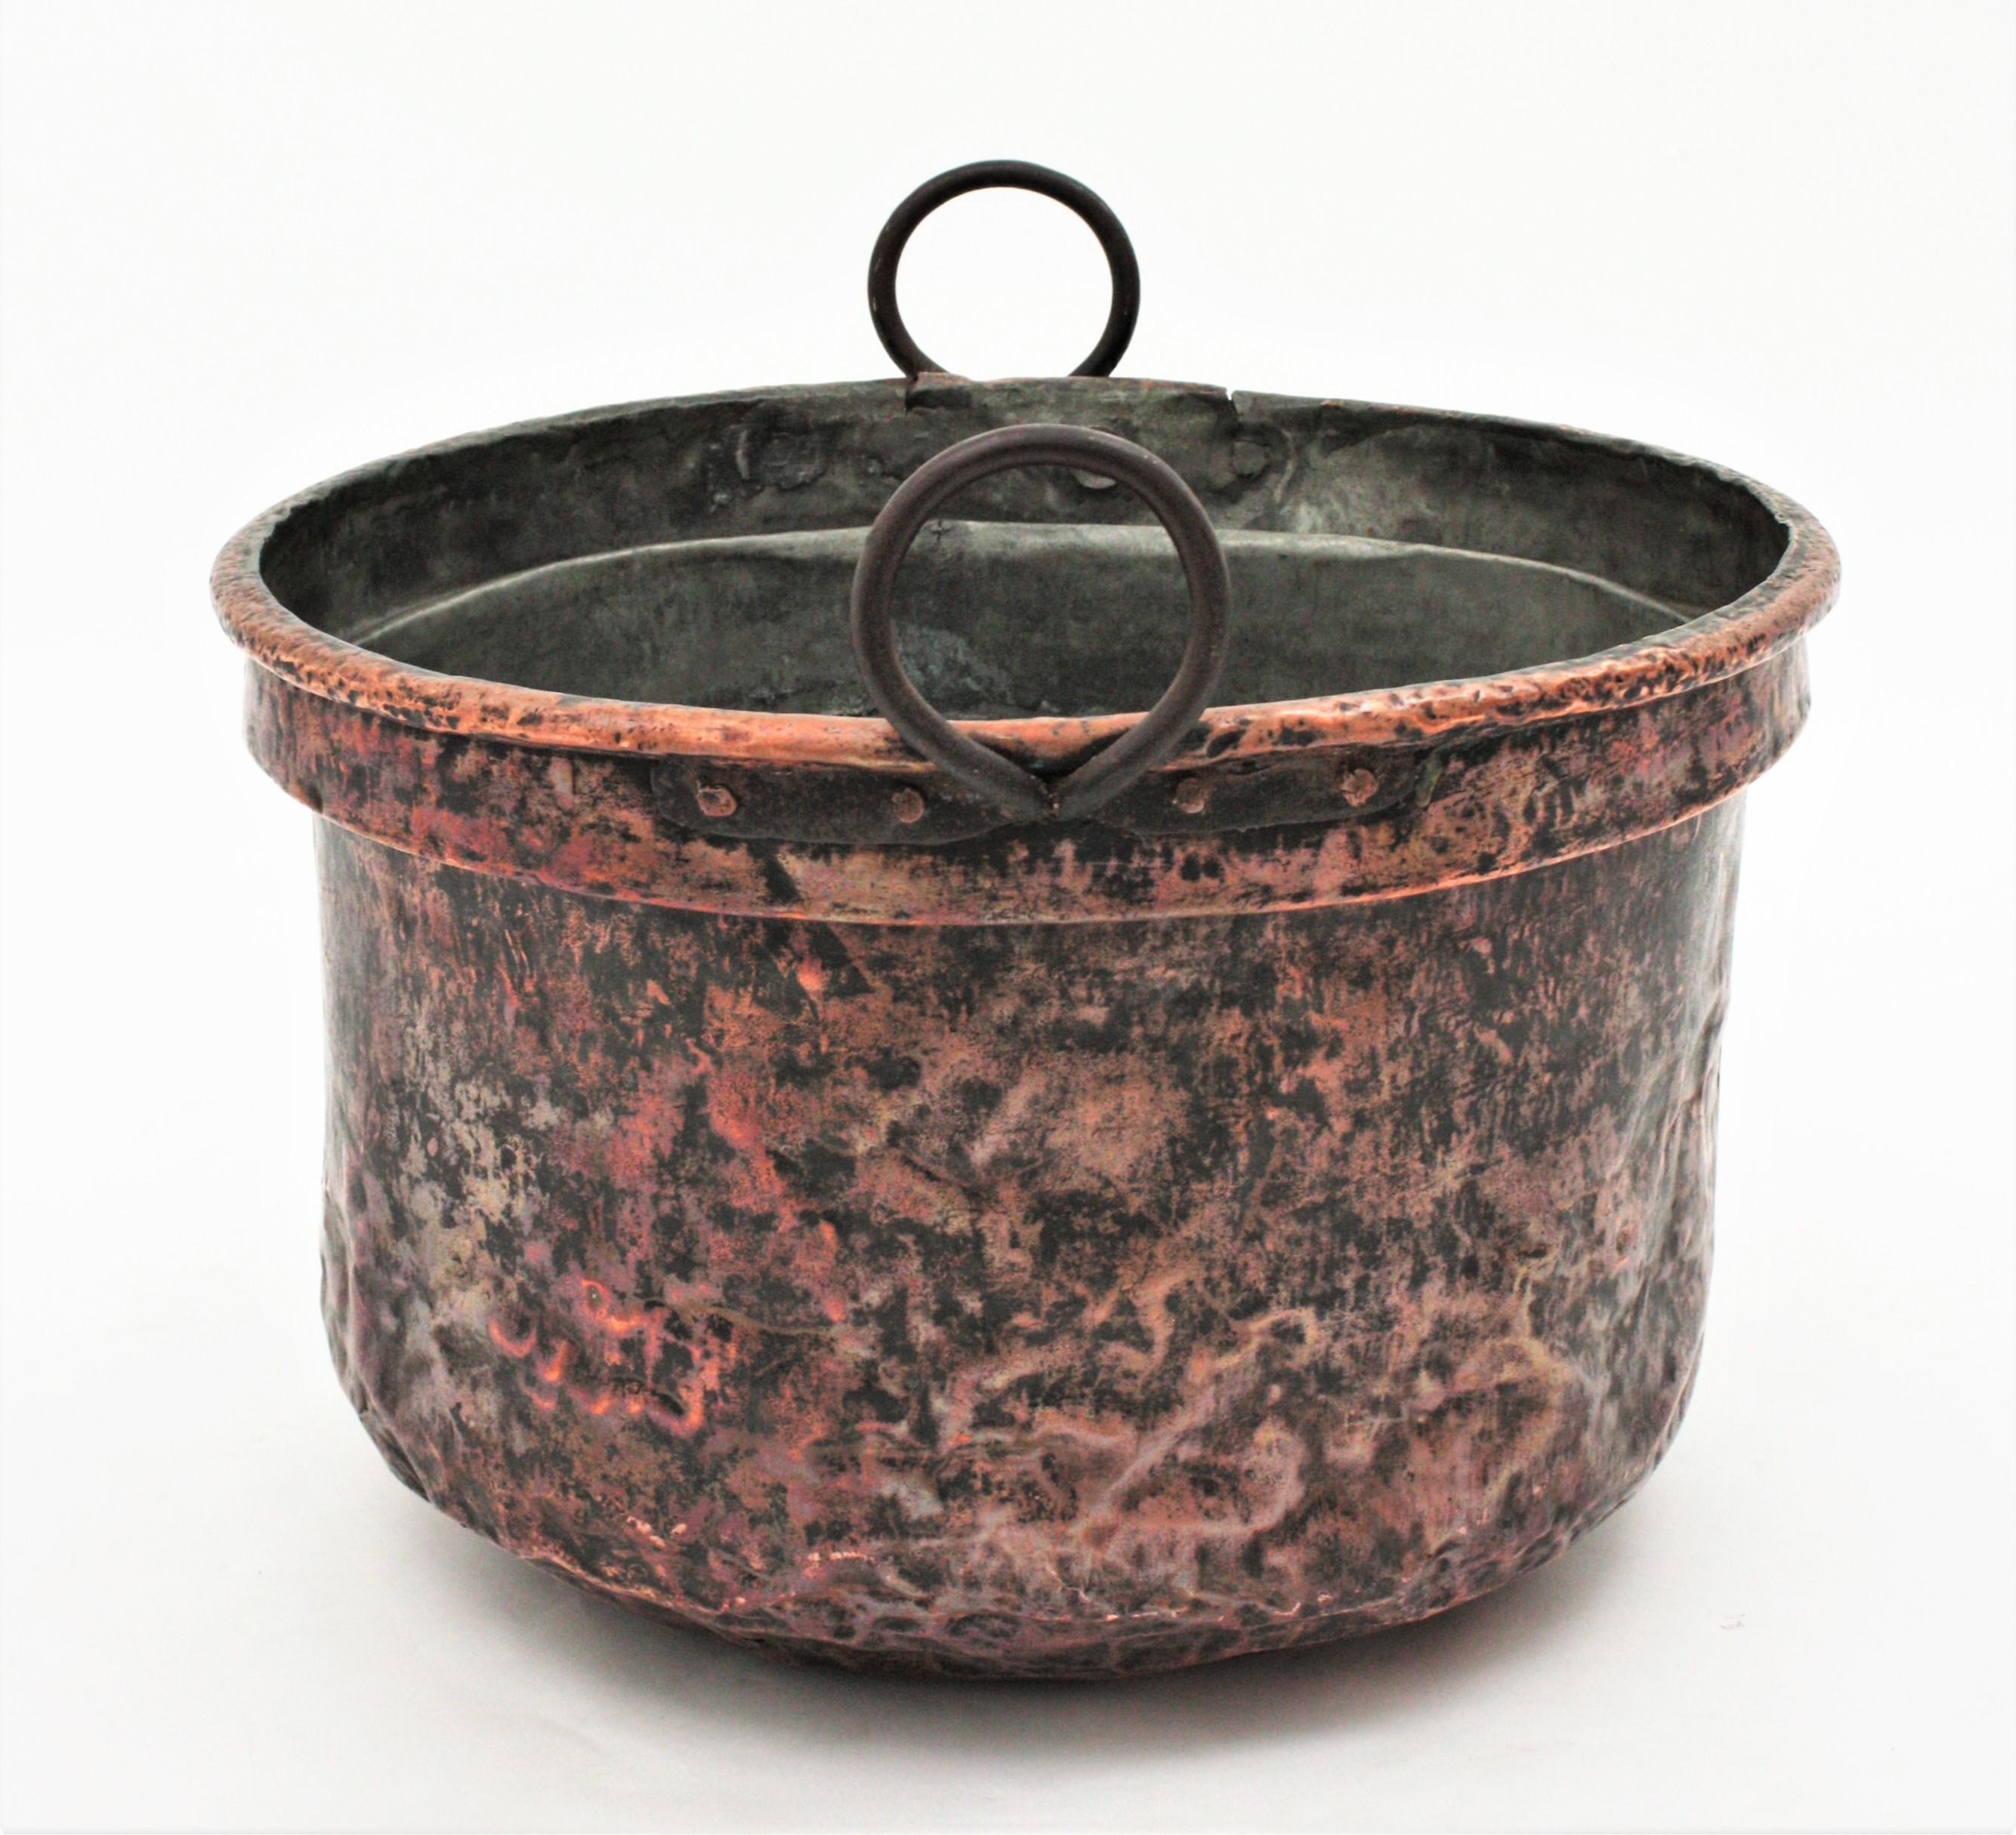 Massive 19th Century French Copper Cauldron with Handles and Terrific Patina 6